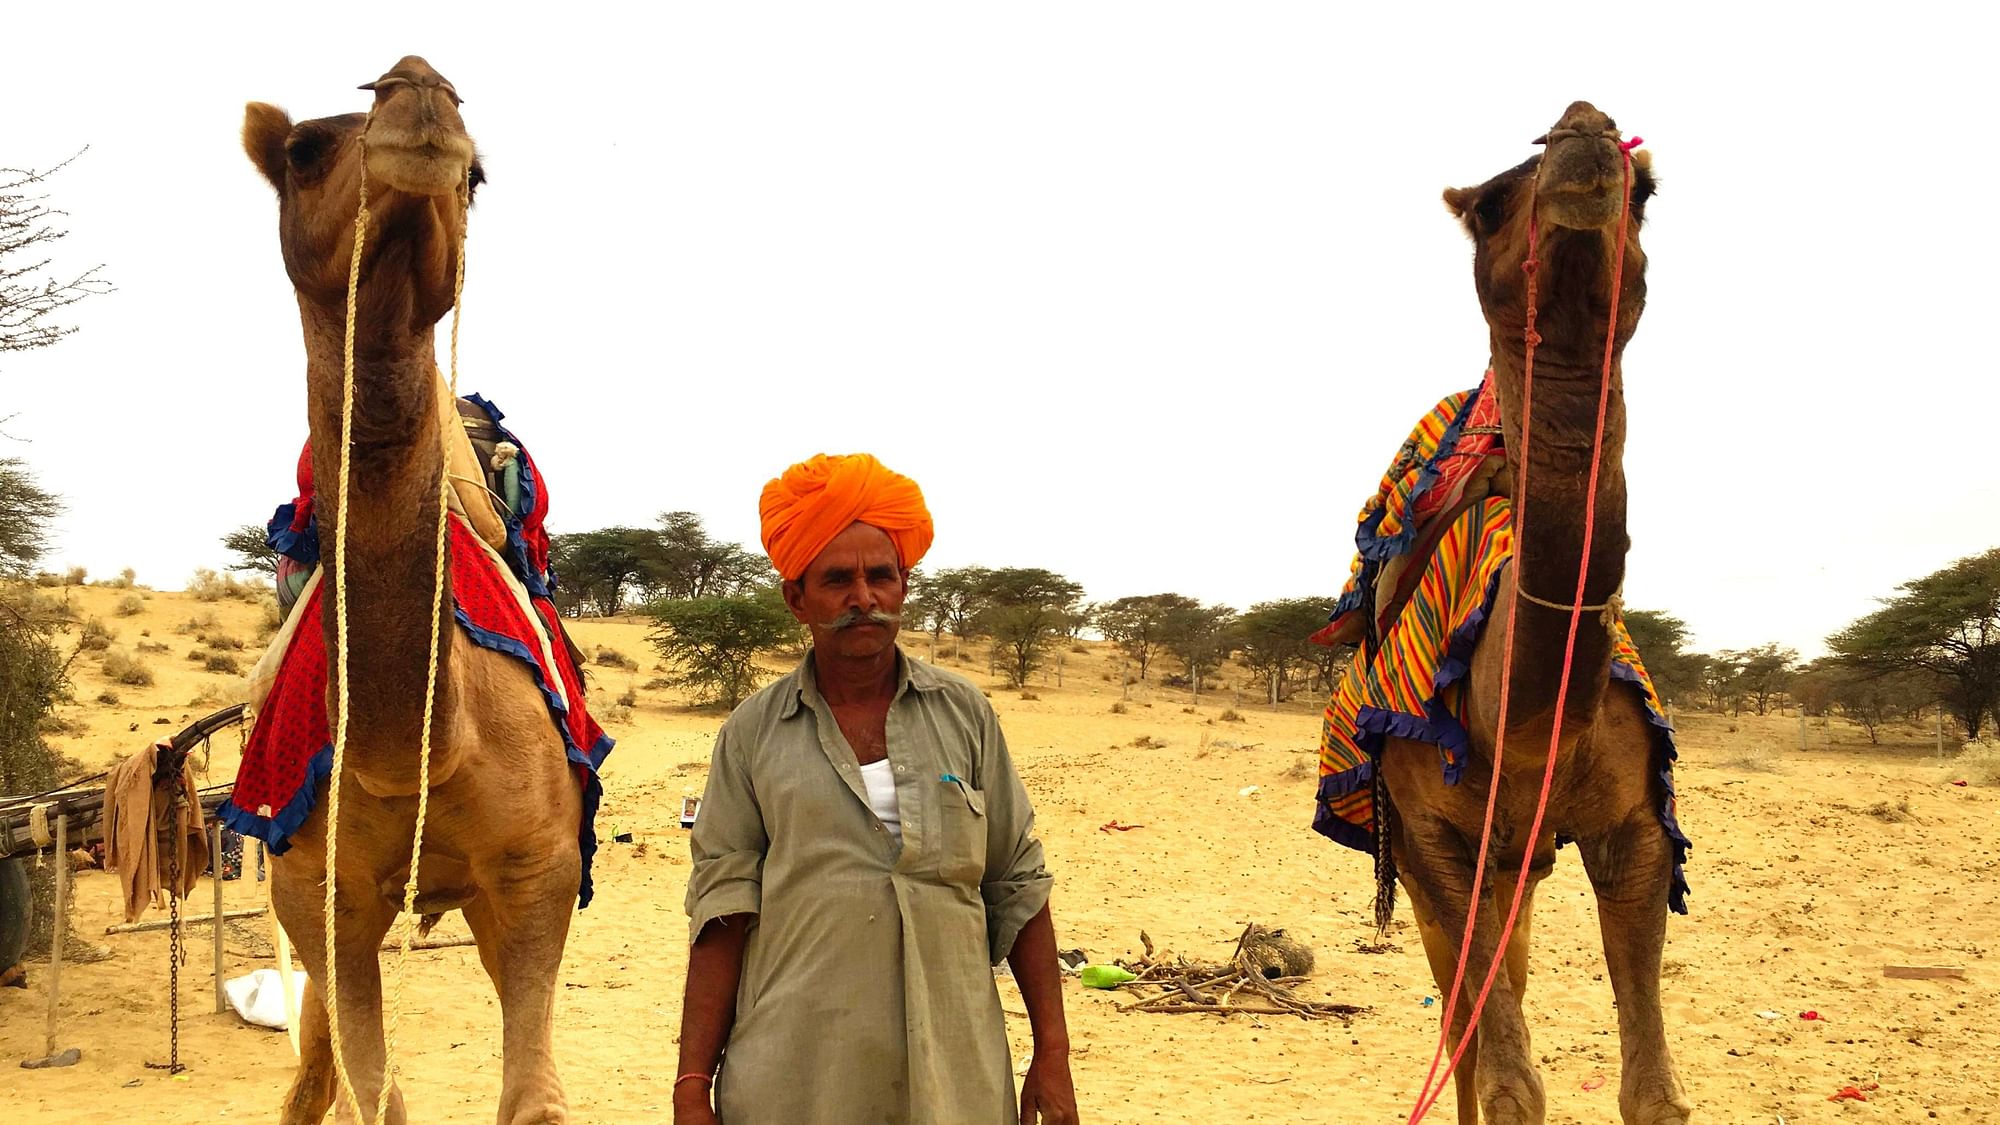 As a part of The Quint‘s election coverage, we reached the Sam desert in Jaisalmer, Rajasthan to learn what a day in the lives of a camel breeder entails.